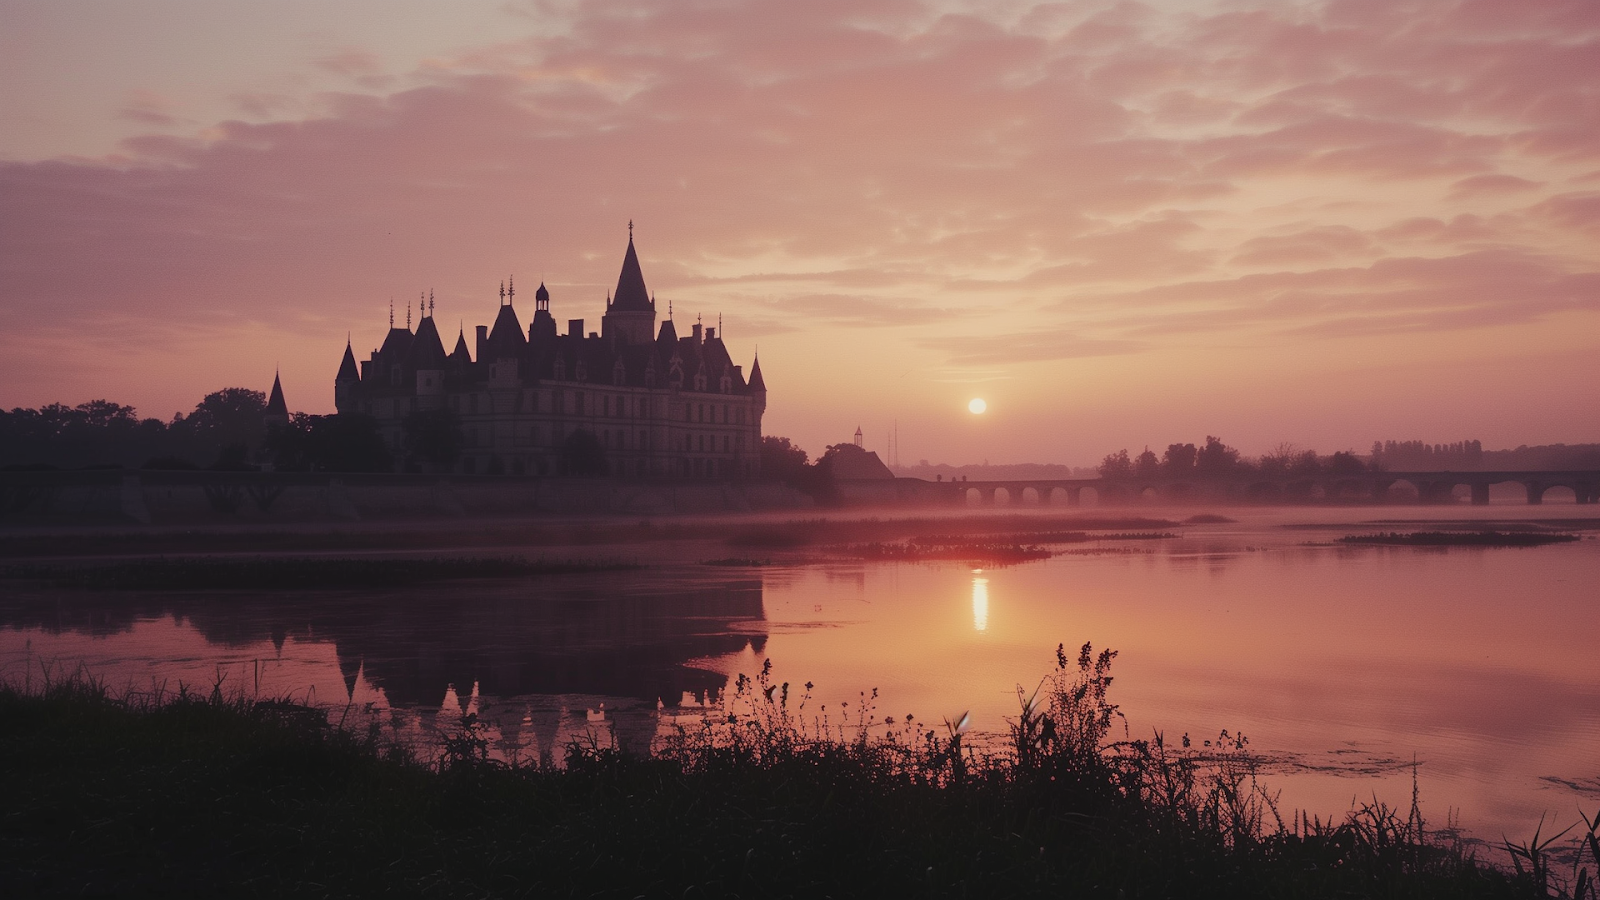 Sunrise over Loire Valley with a château silhouette against a pink and orange sky.